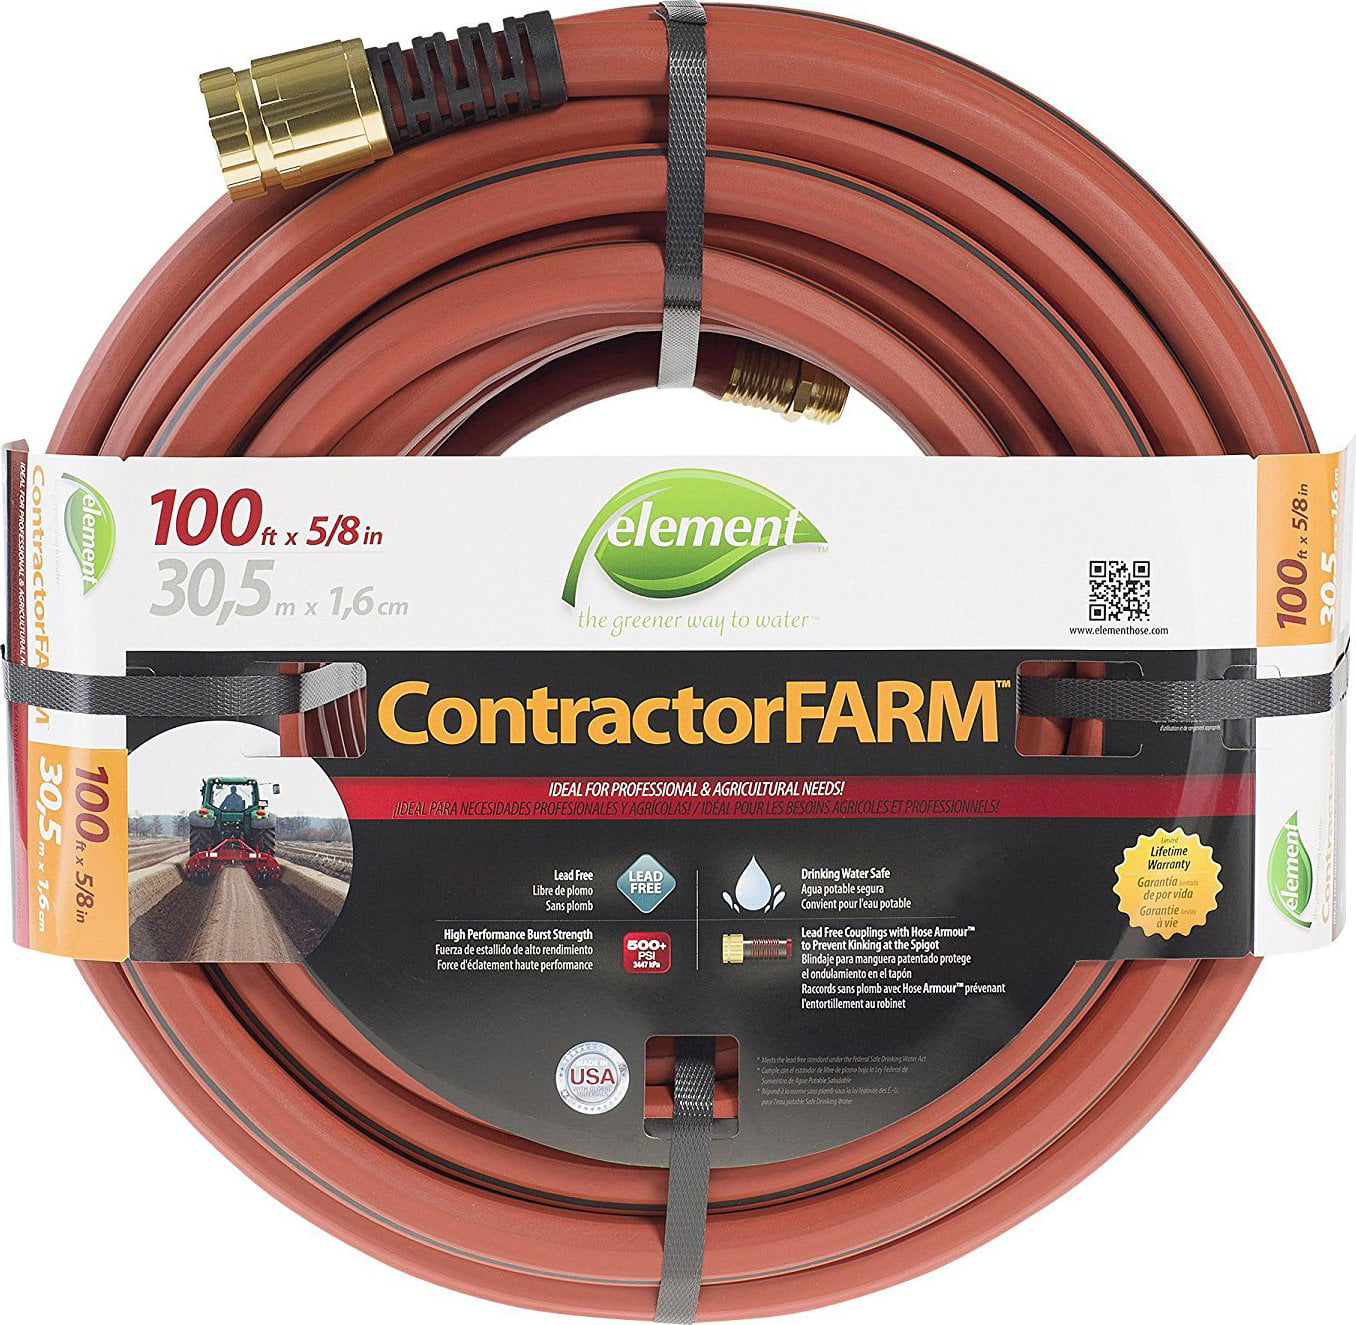 5/8 in Element Contractor Farm Premium Duty Water Hose strength Dia x 100 ft 